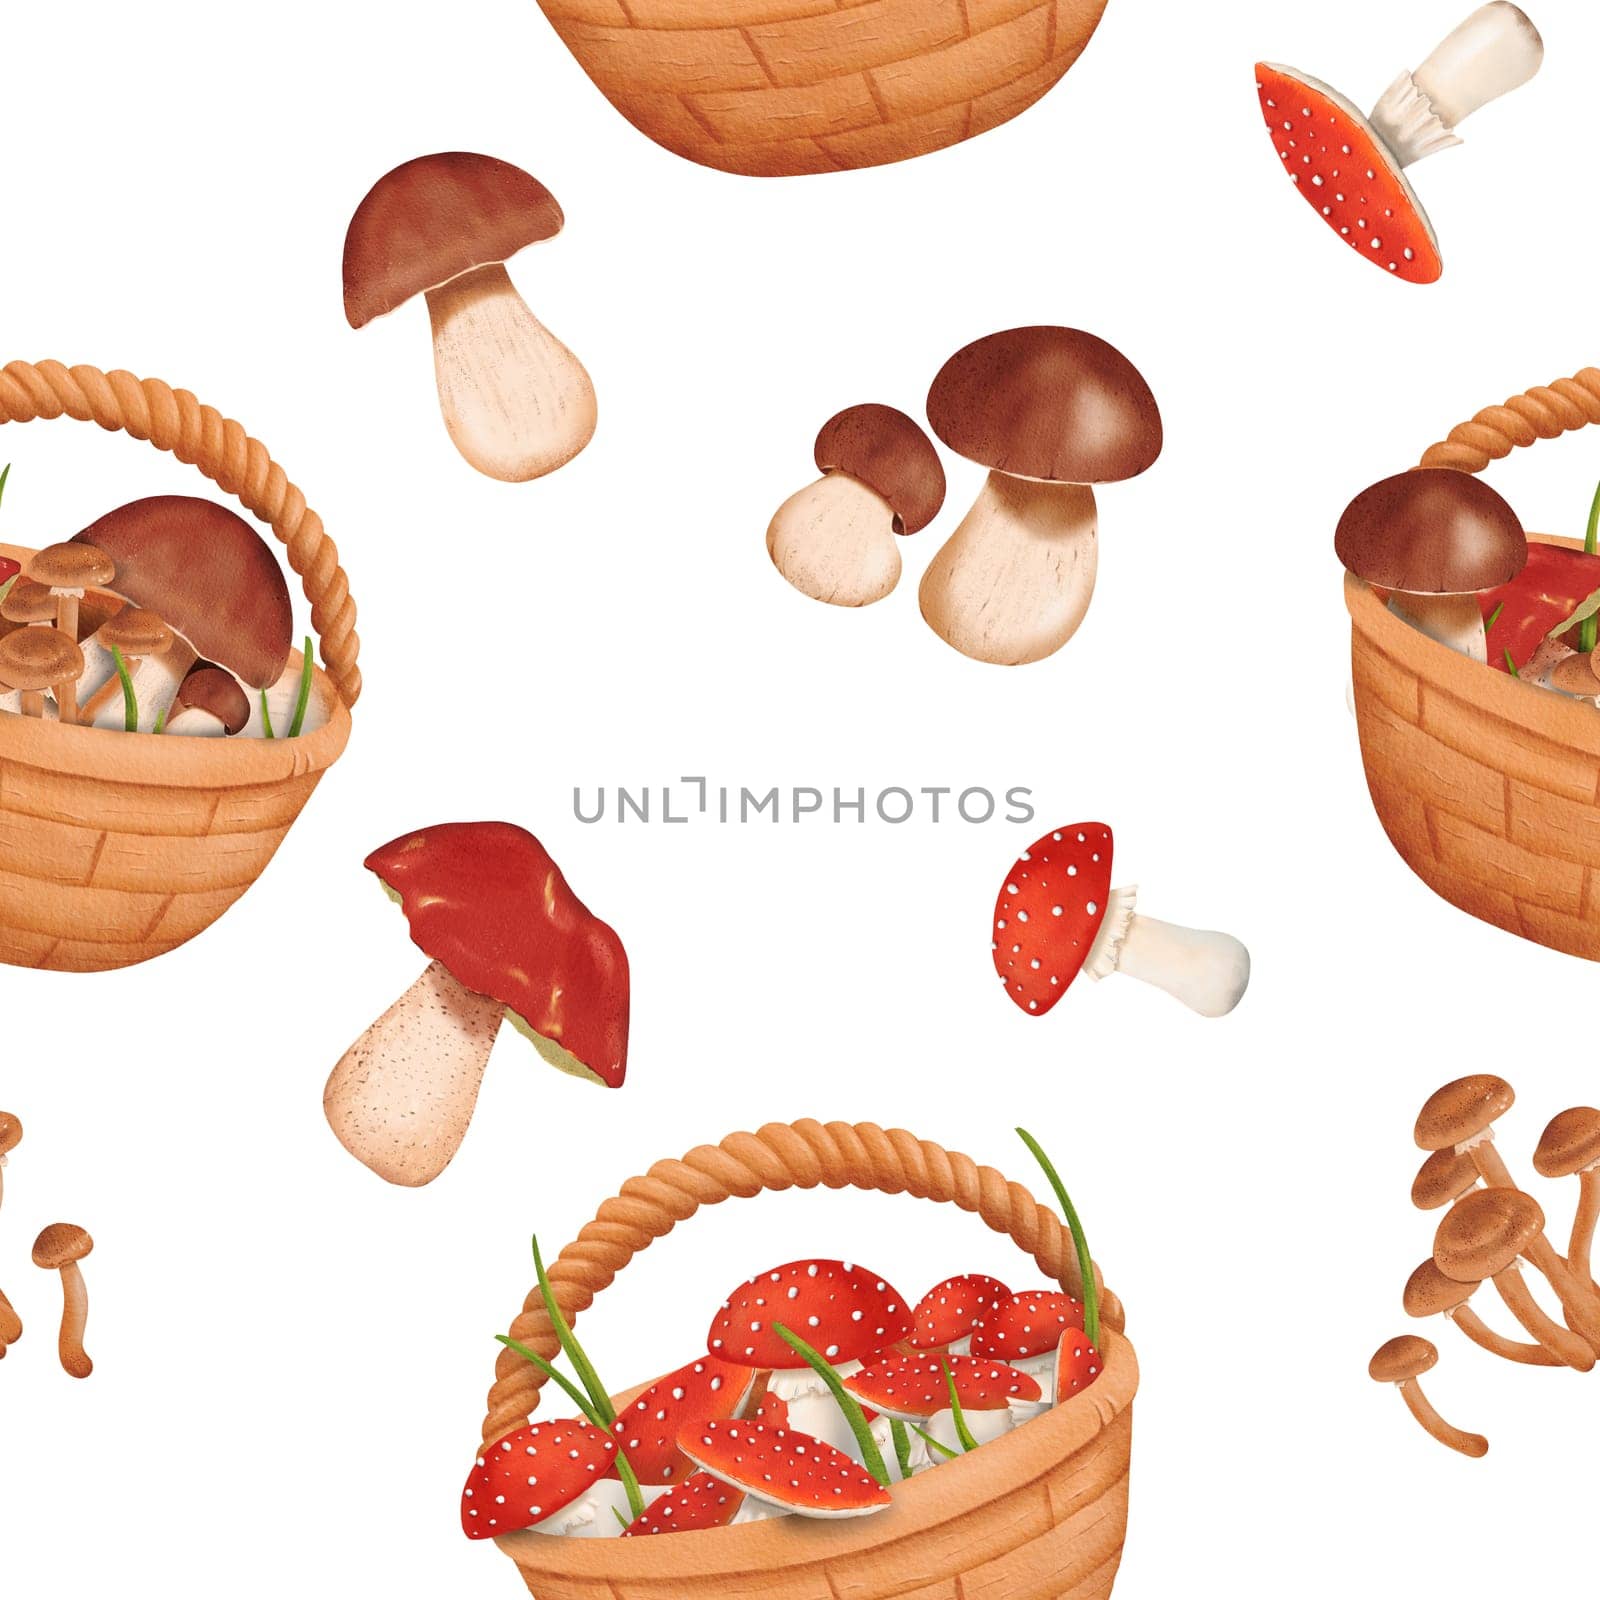 Woodland seamless pattern. harvest of various mushrooms. Baskets filled with forest treasures. Edible penny bun and delicious porcini mushrooms. Dangerous and poisonous fly agaric. Autumn watercolor by Art_Mari_Ka